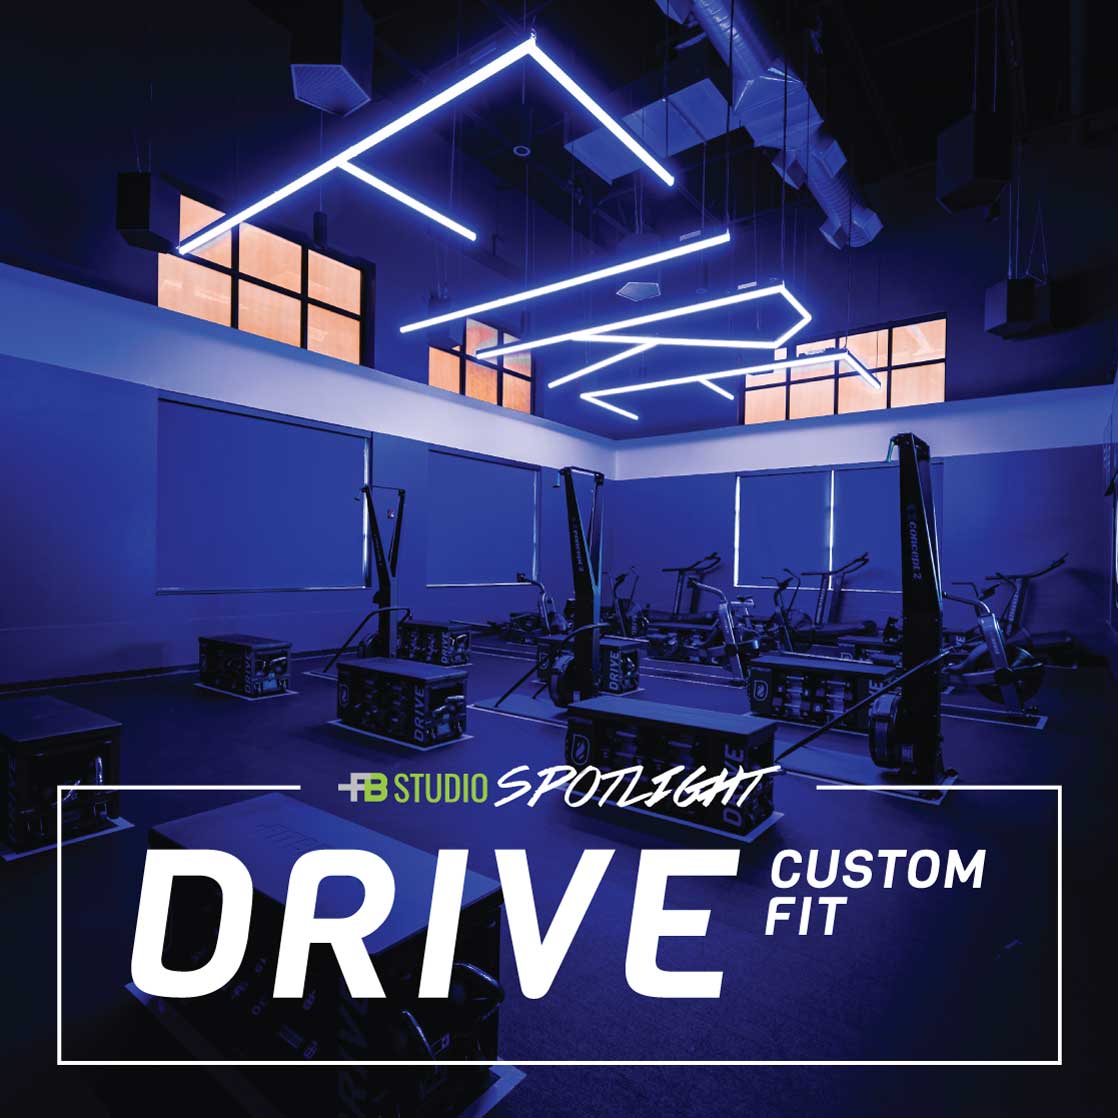 drive custom fit salem fitness center with customized fitbench ones